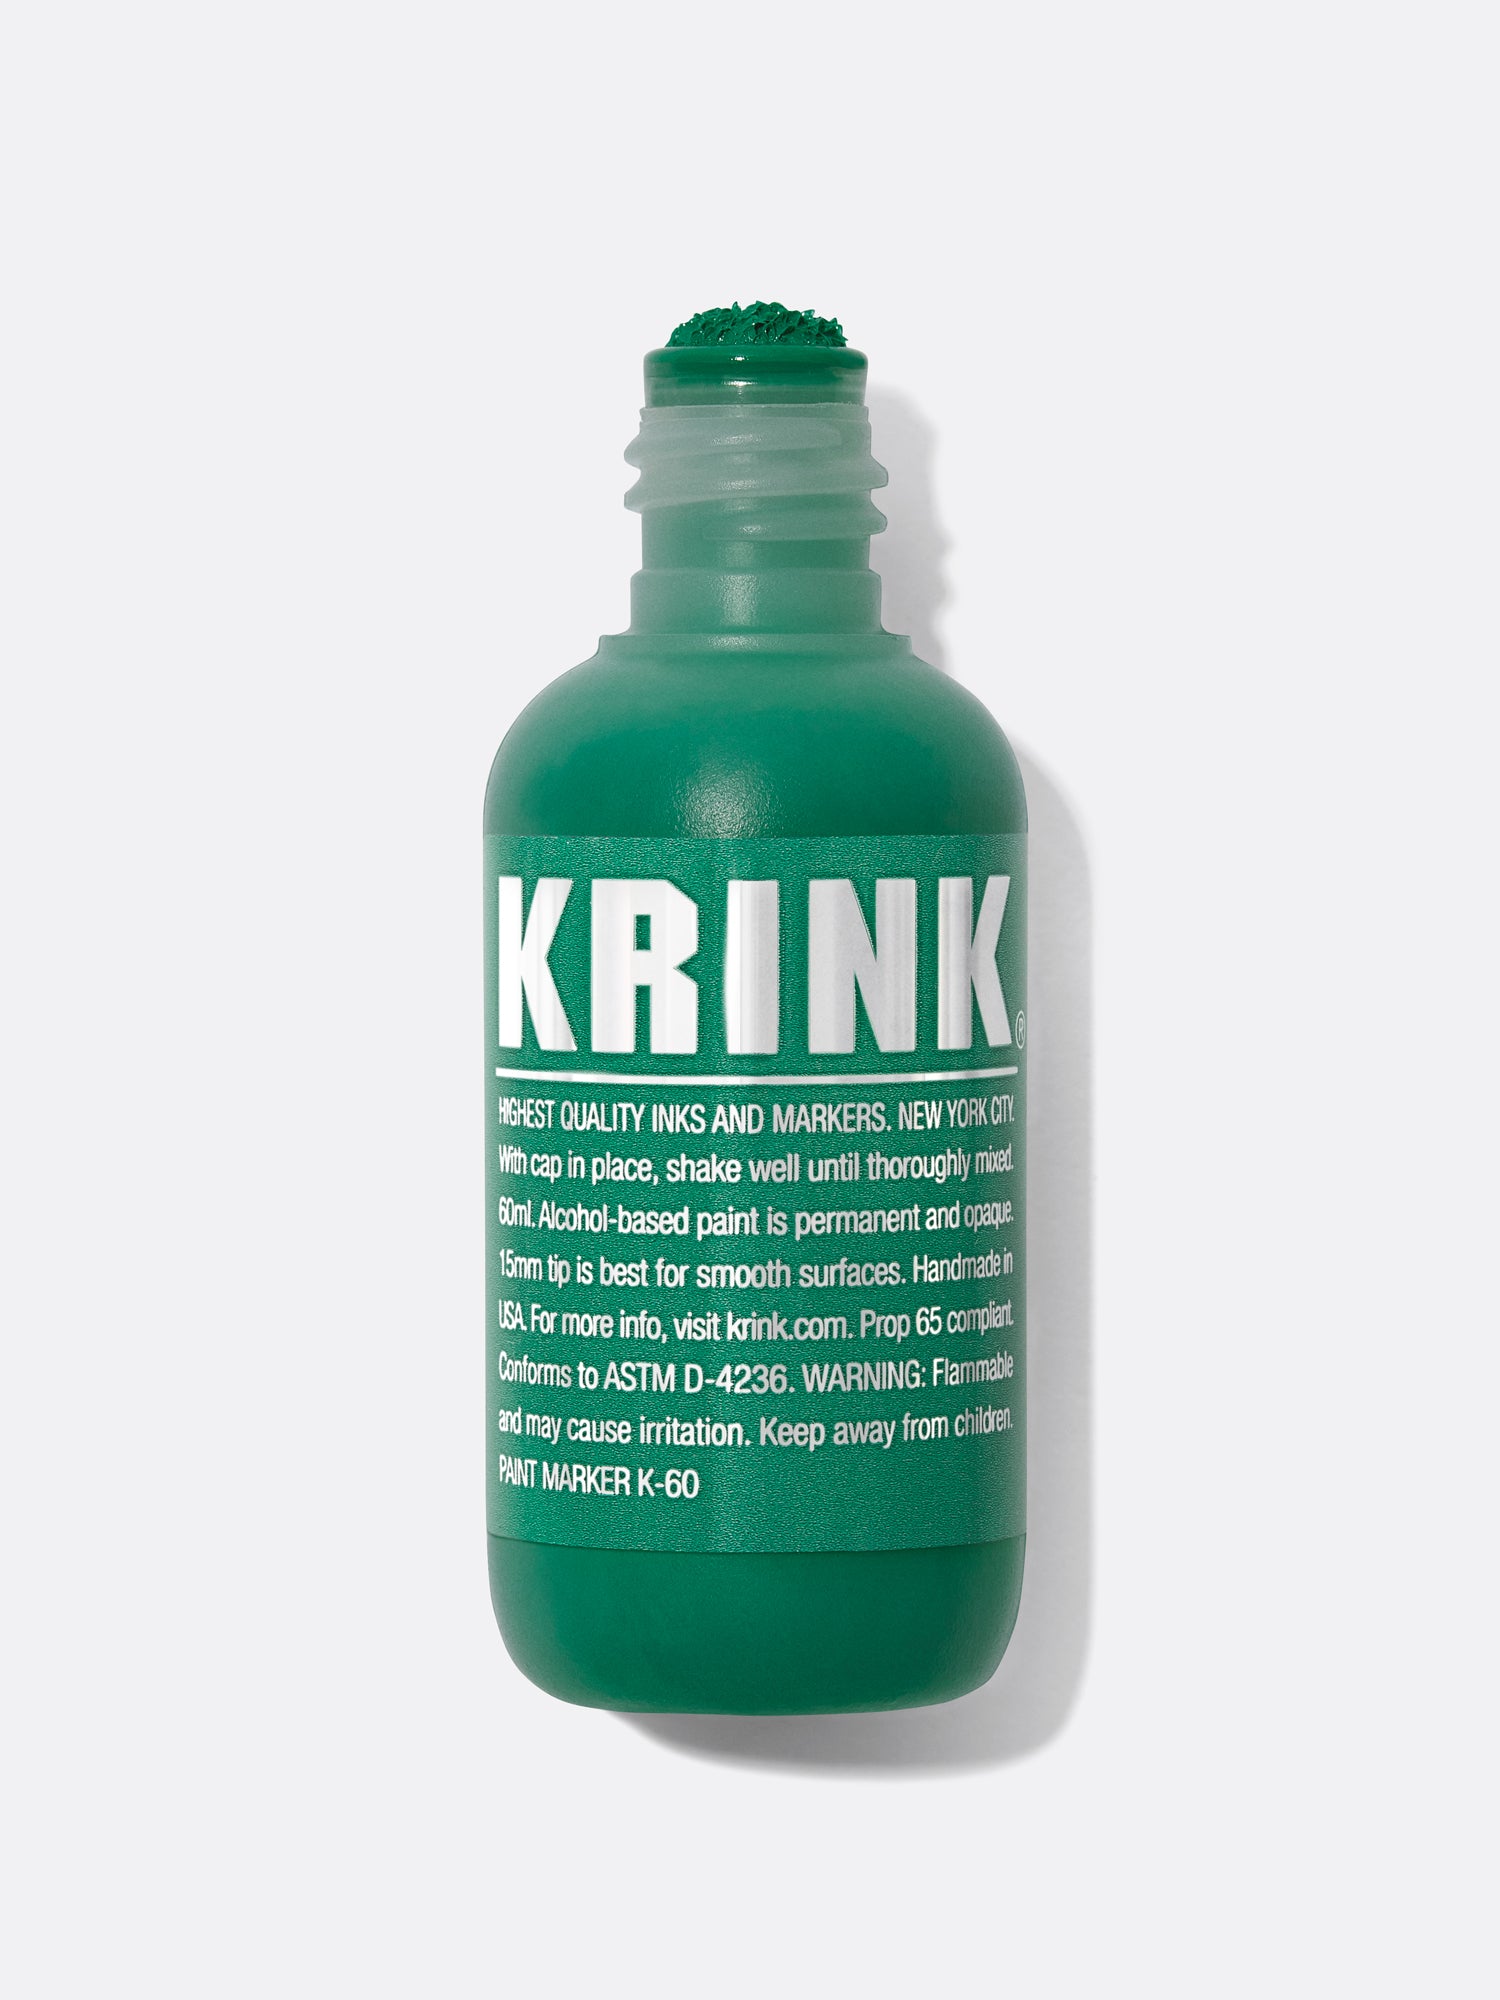 Buy K 60 Squeezable Paint Marker Online | Krink Green / Pack of 12